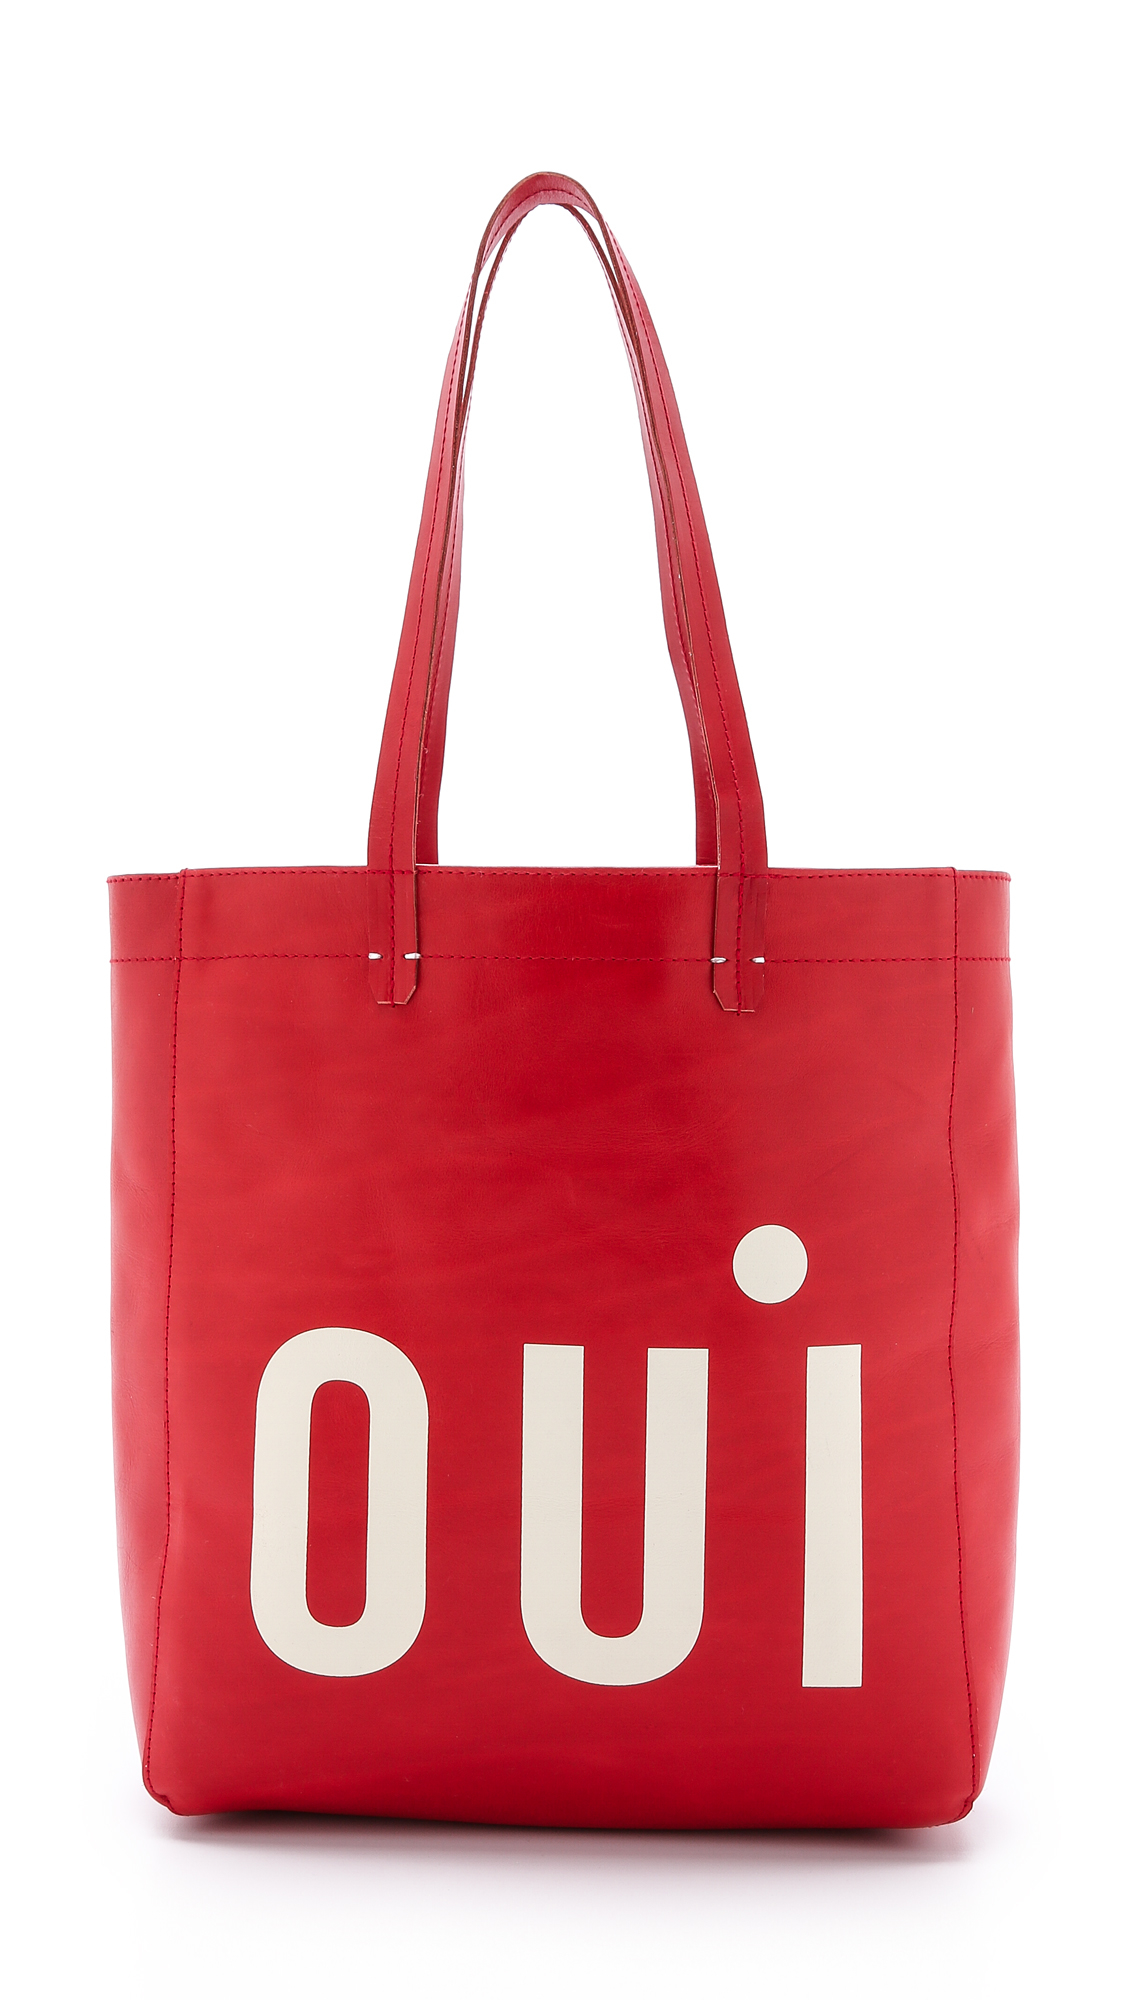 Clare V. Fabric Knotted Tote Bag - Red Totes, Handbags - W2436156